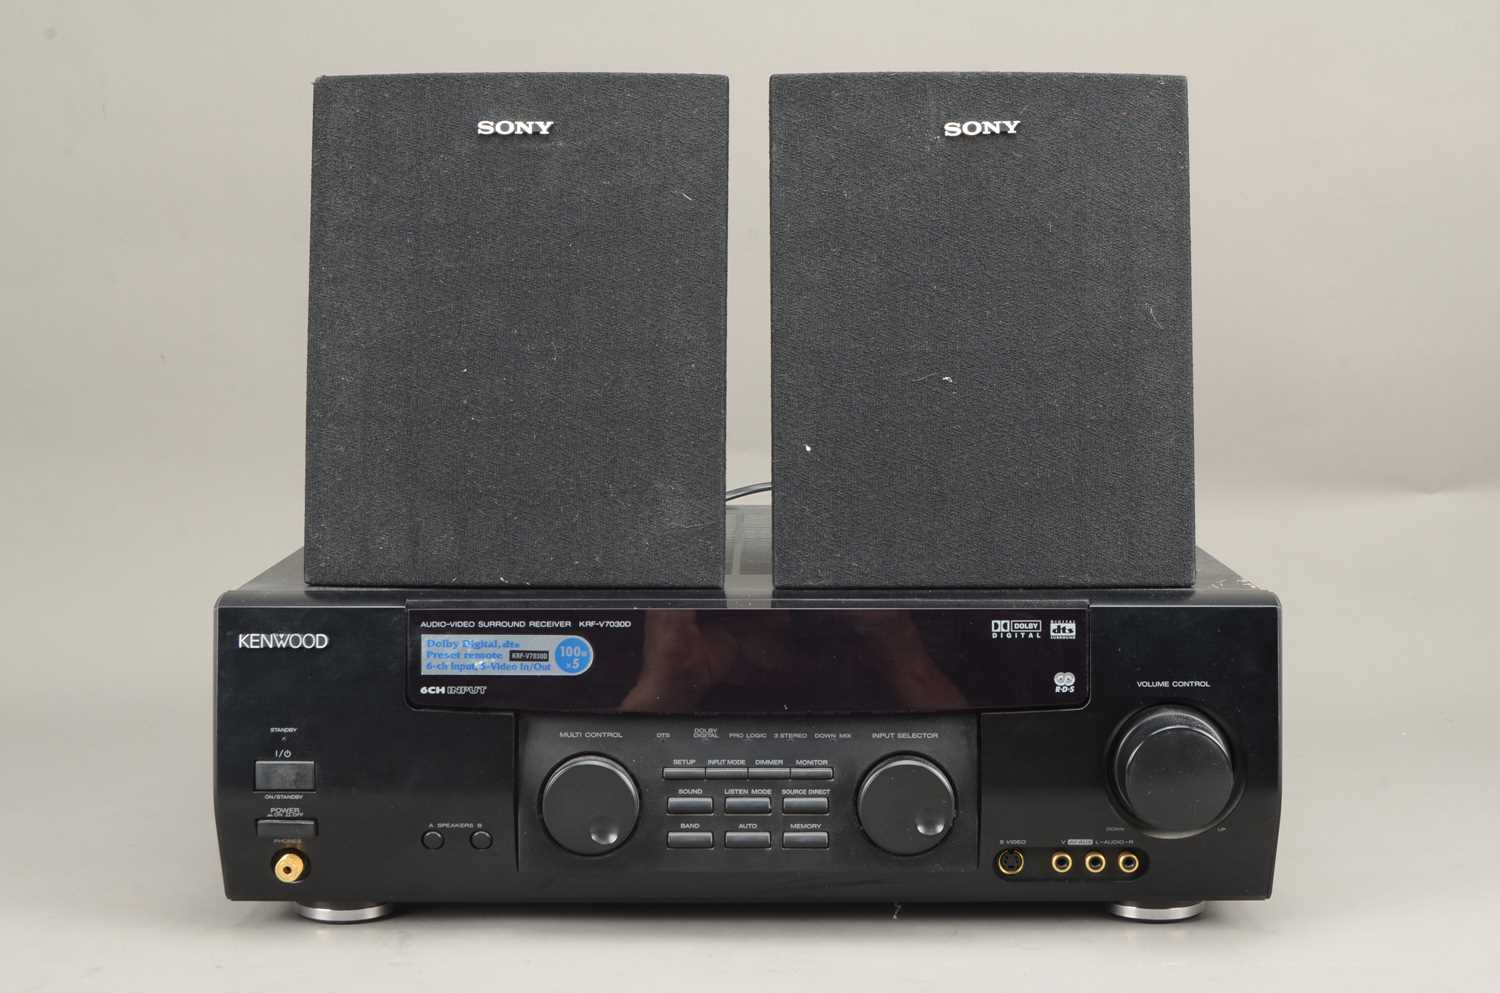 Kenwood Audio Video Receiver / Bose and Sony Speakers, - Image 2 of 7